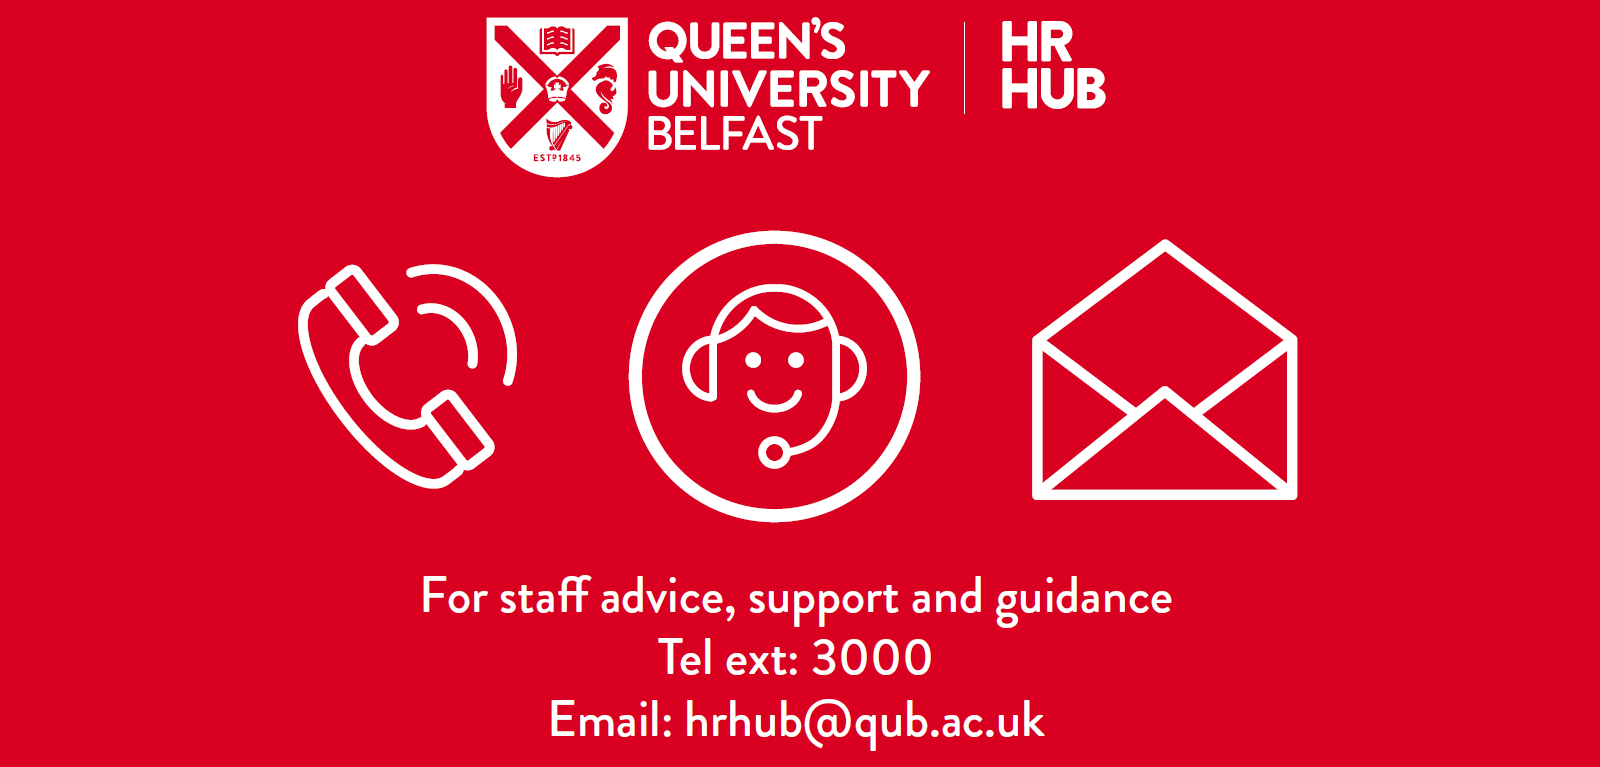 Contact Details for HR Hub, email hrhub@qub.ac.uk telephone extension 3000